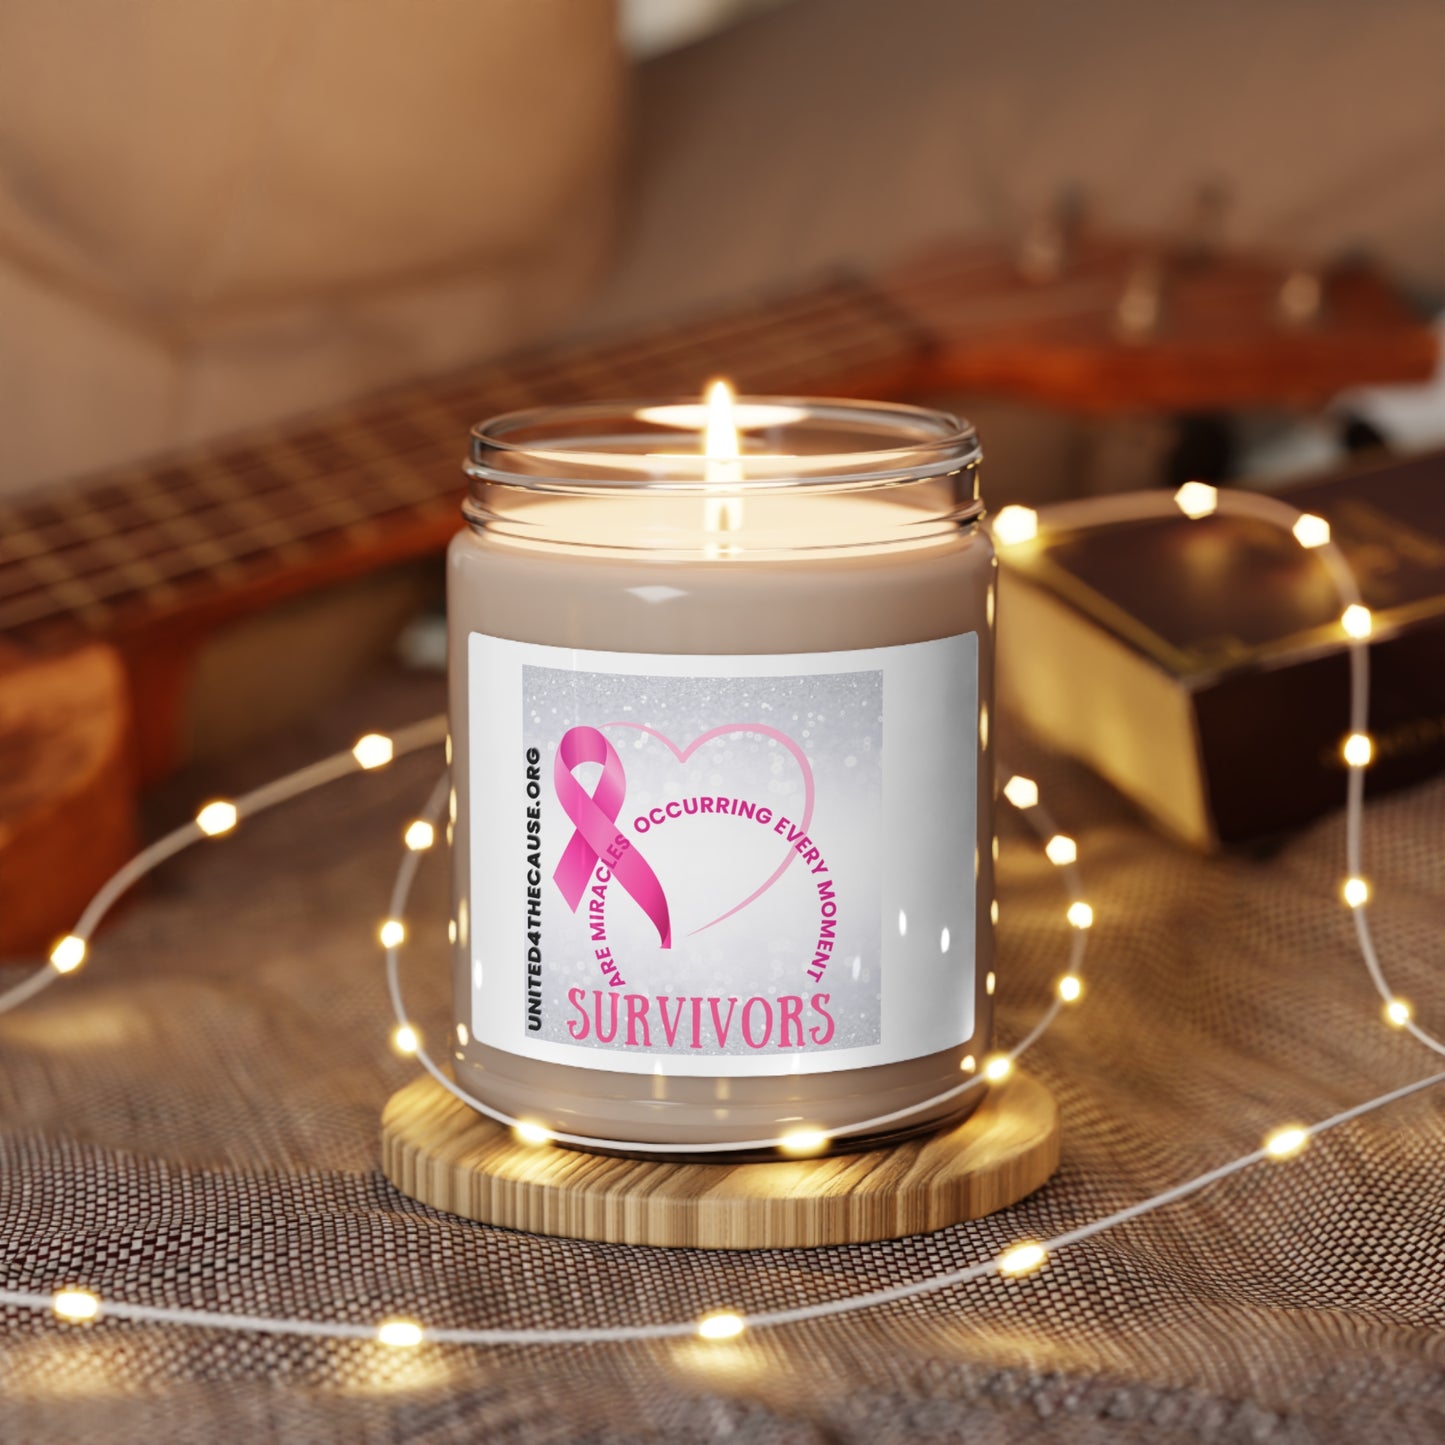 Survivors are miracles made every moment Scented Soy Candle, 9oz